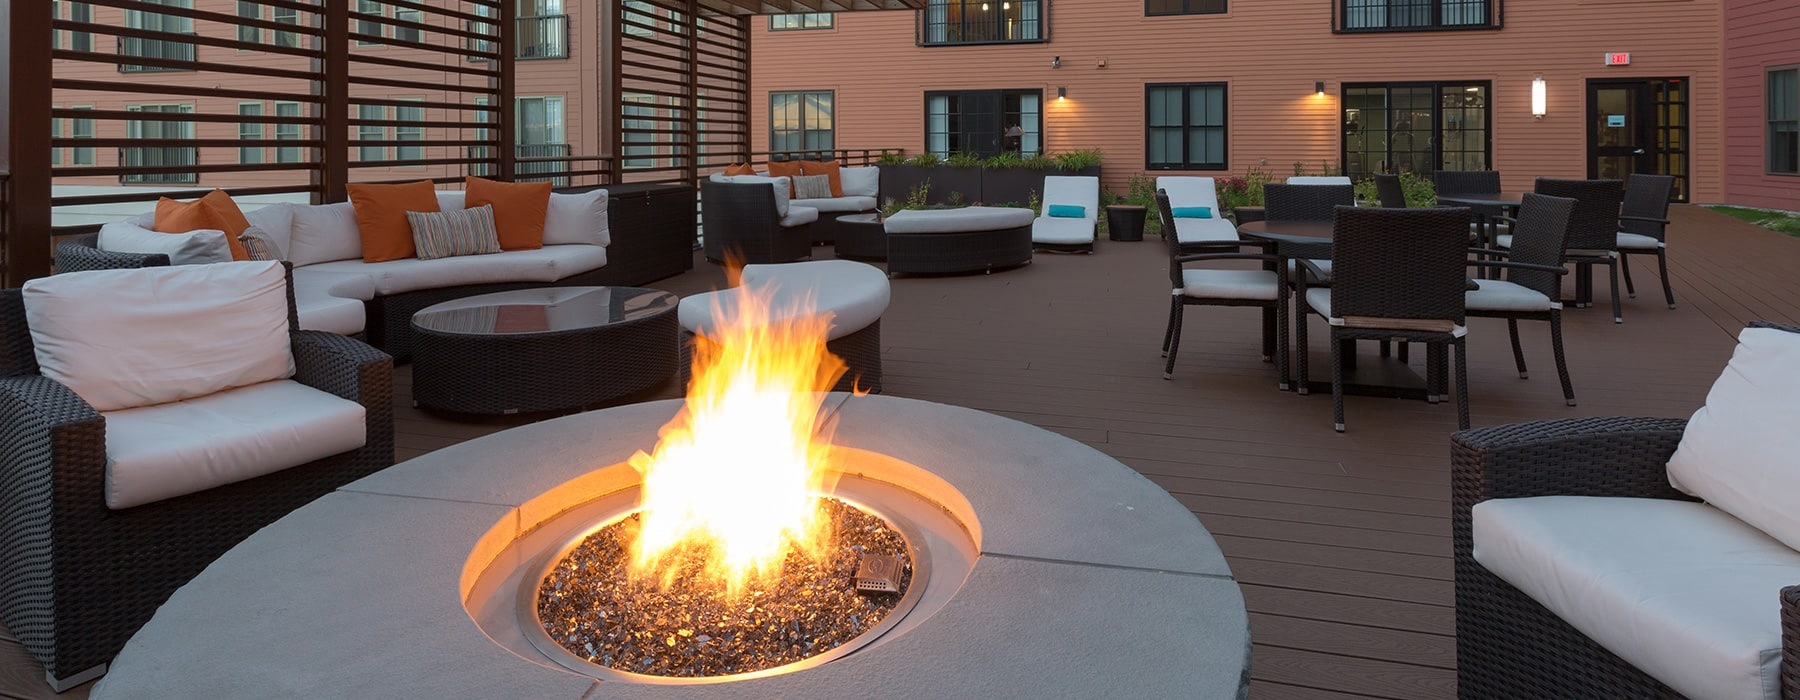 outdoor courtyard area with a firepit, lounge seating and spacious areas